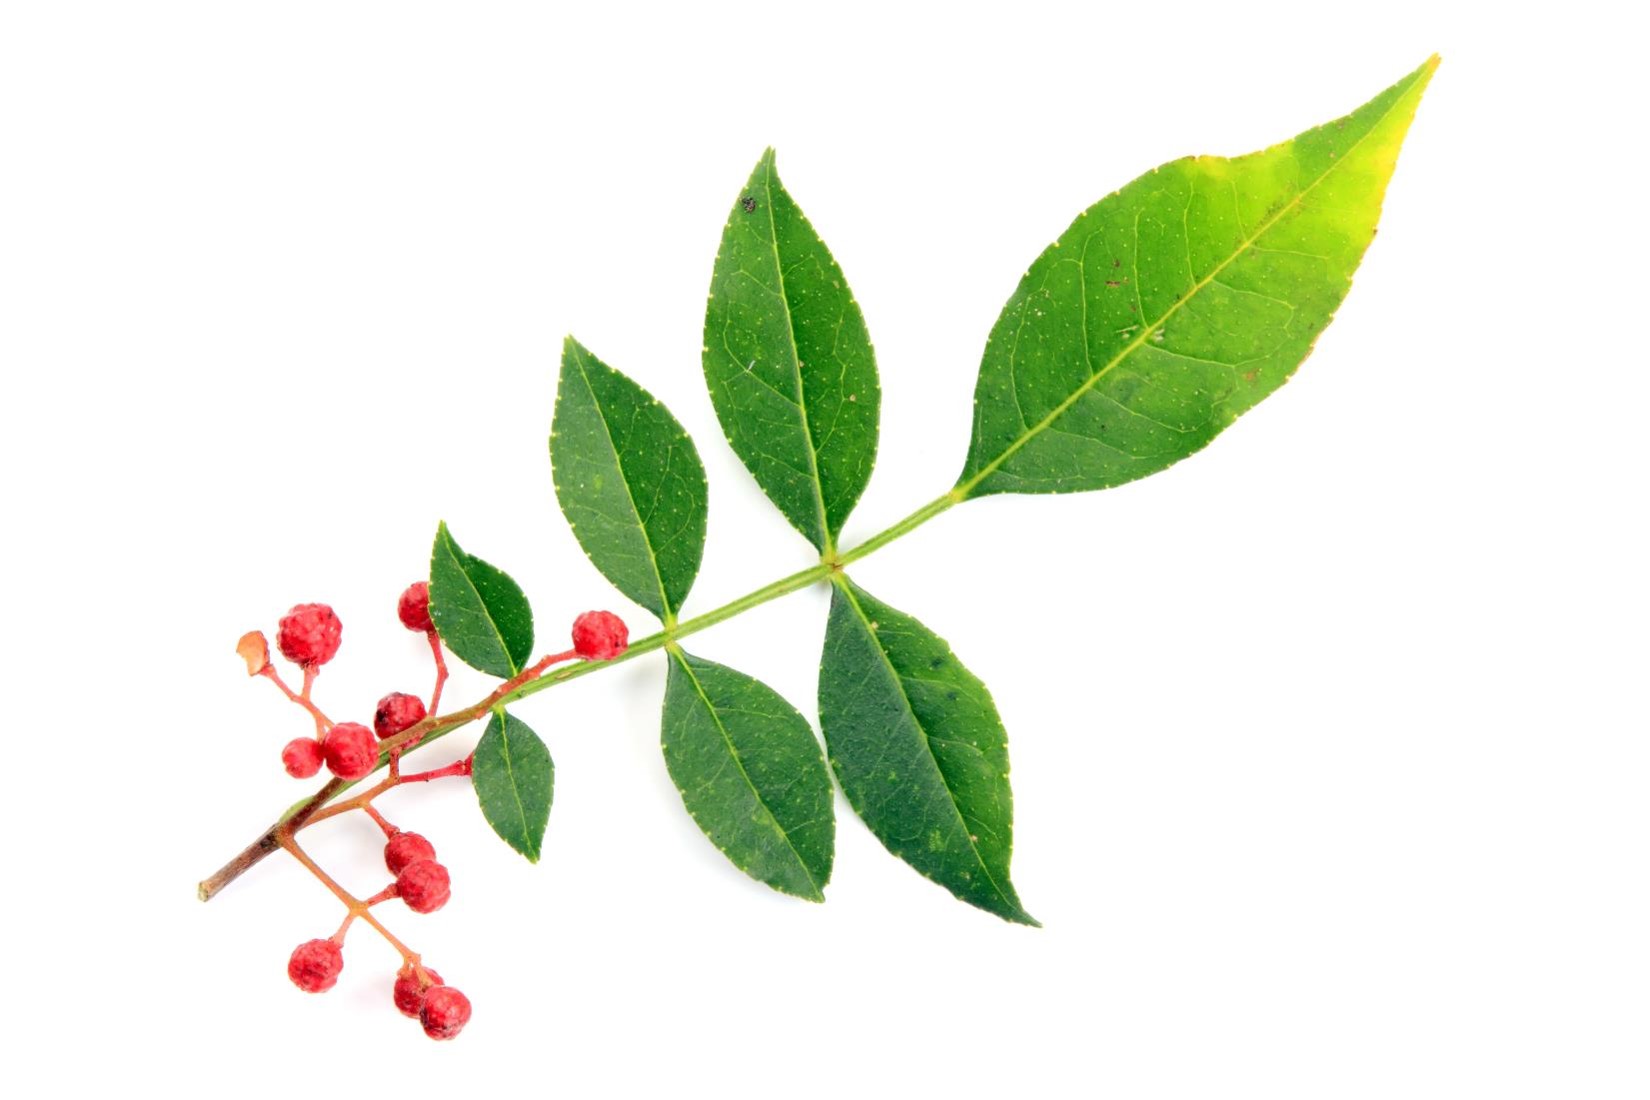 FIND OUT MORE ABOUT SICHUAN PEPPER